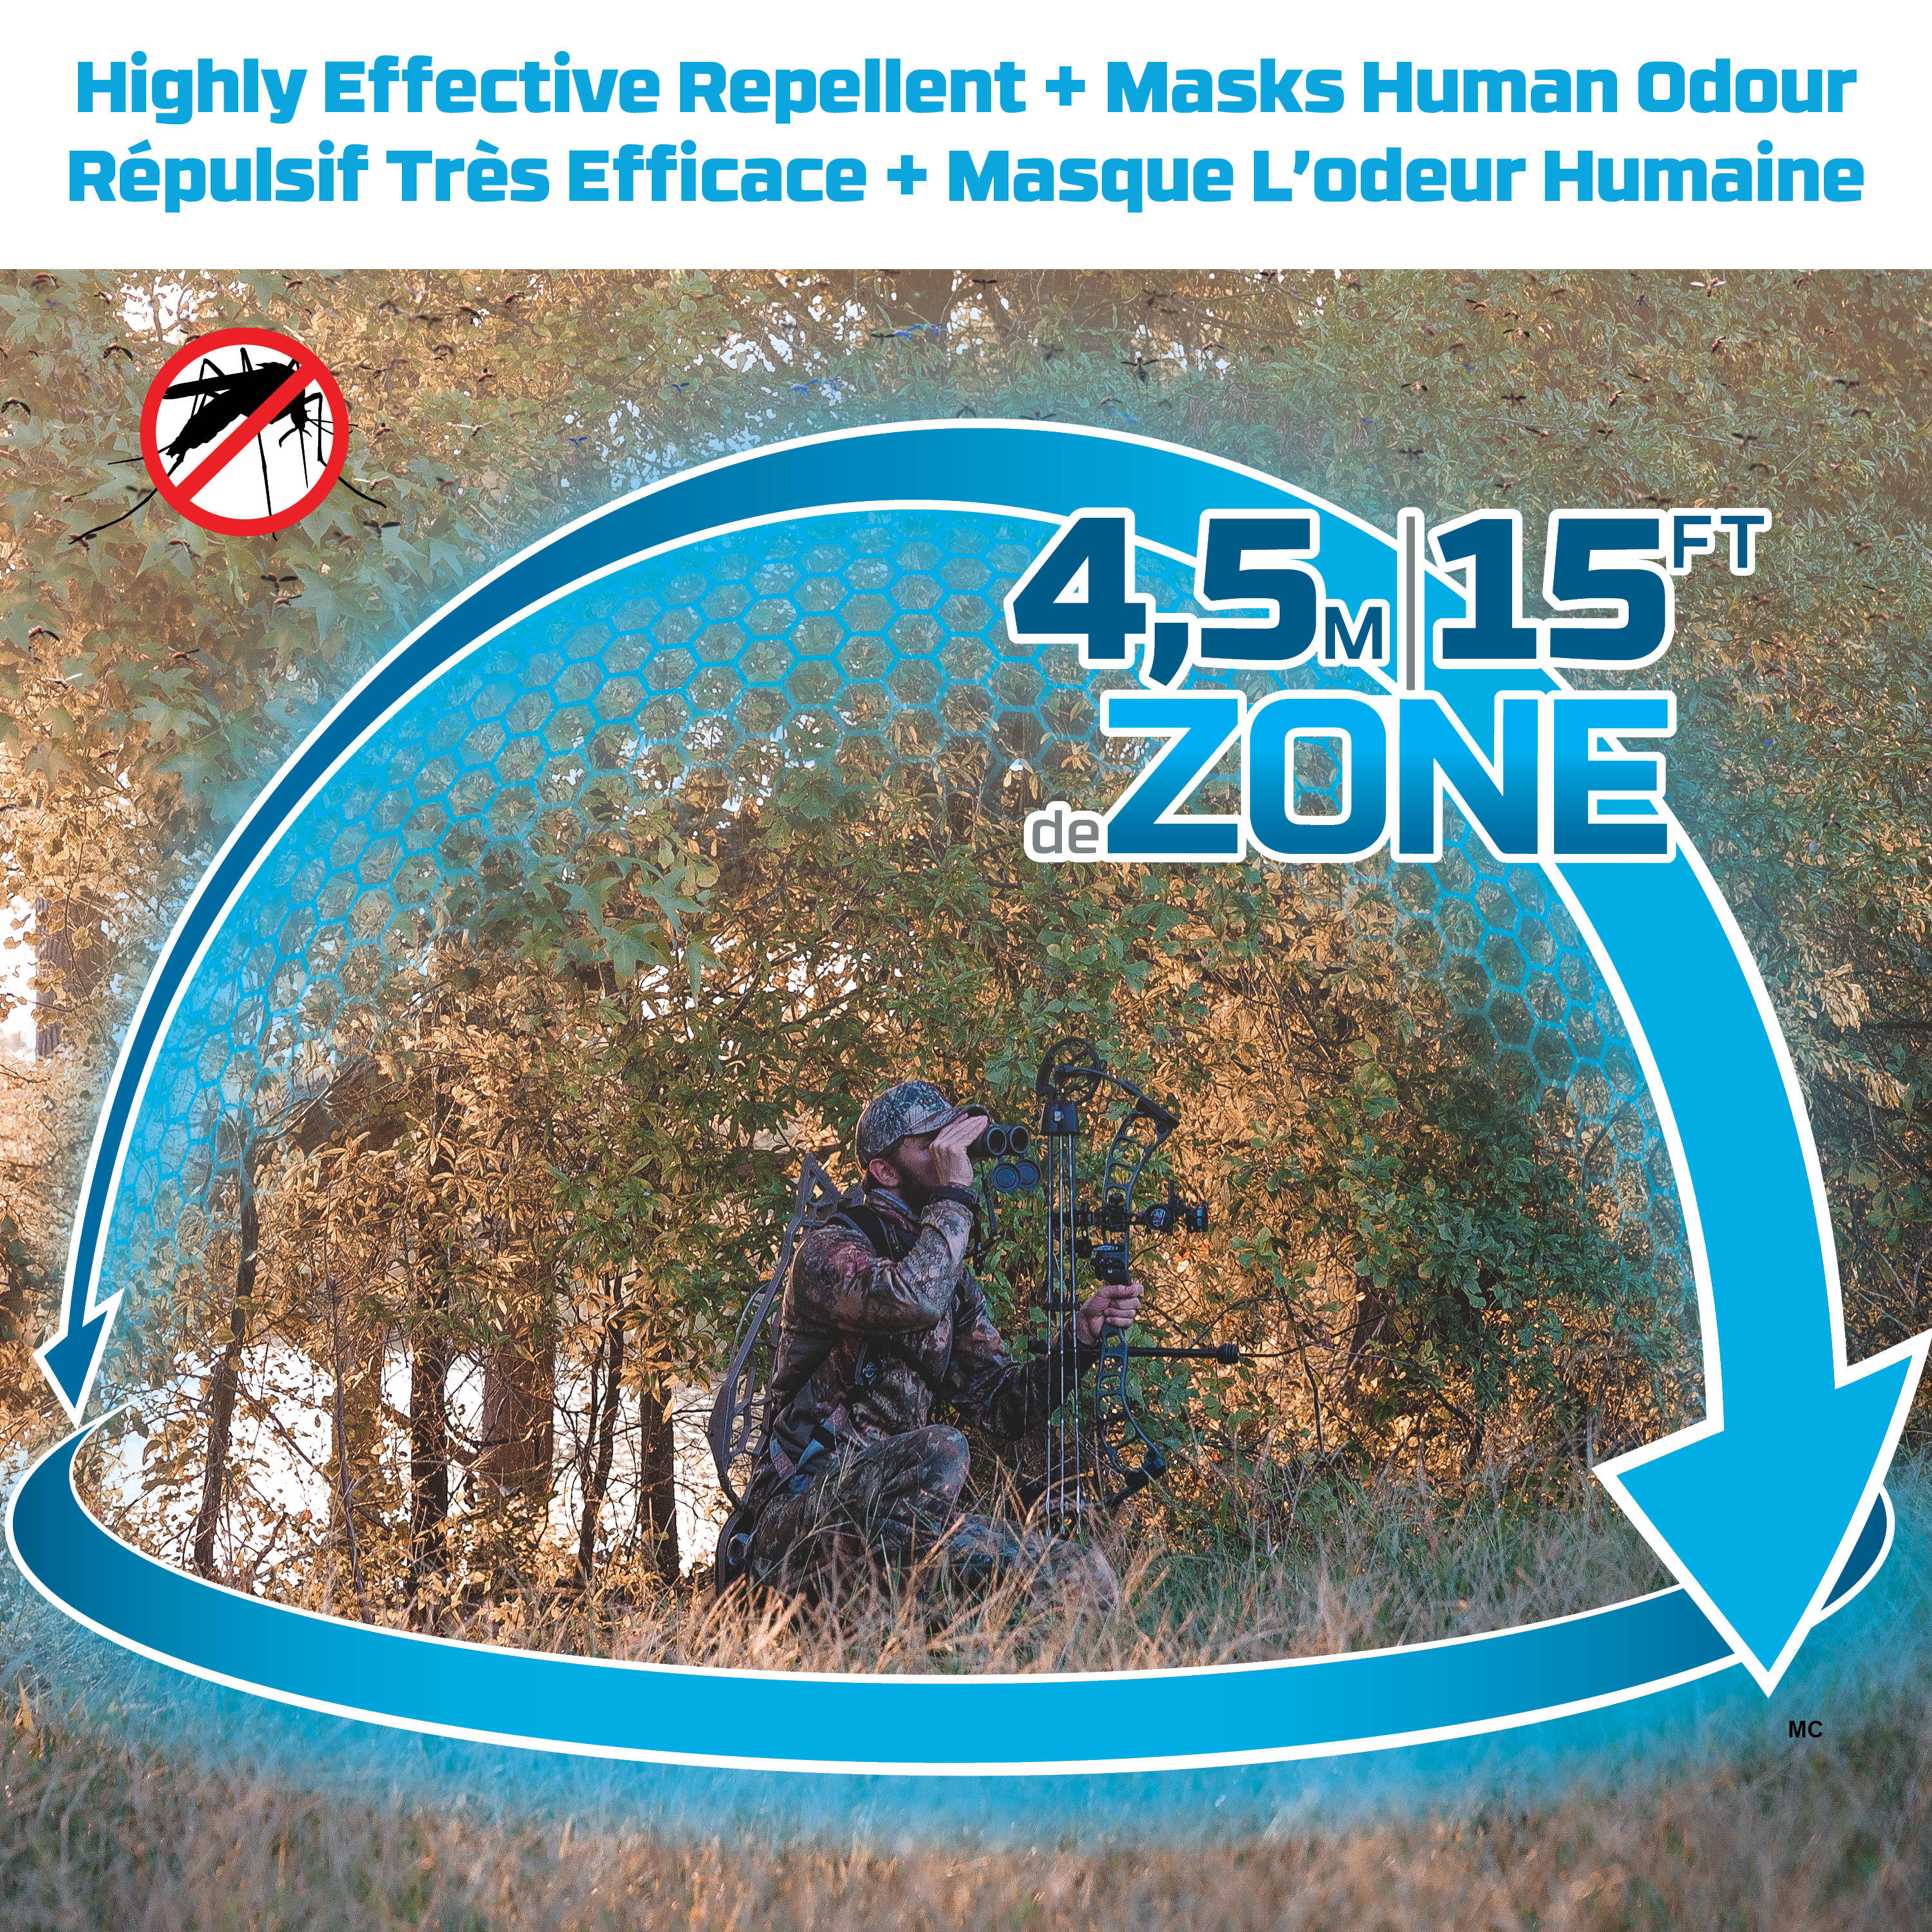 ThermaCELL® Earth Scent Mosquito Repellent Refills